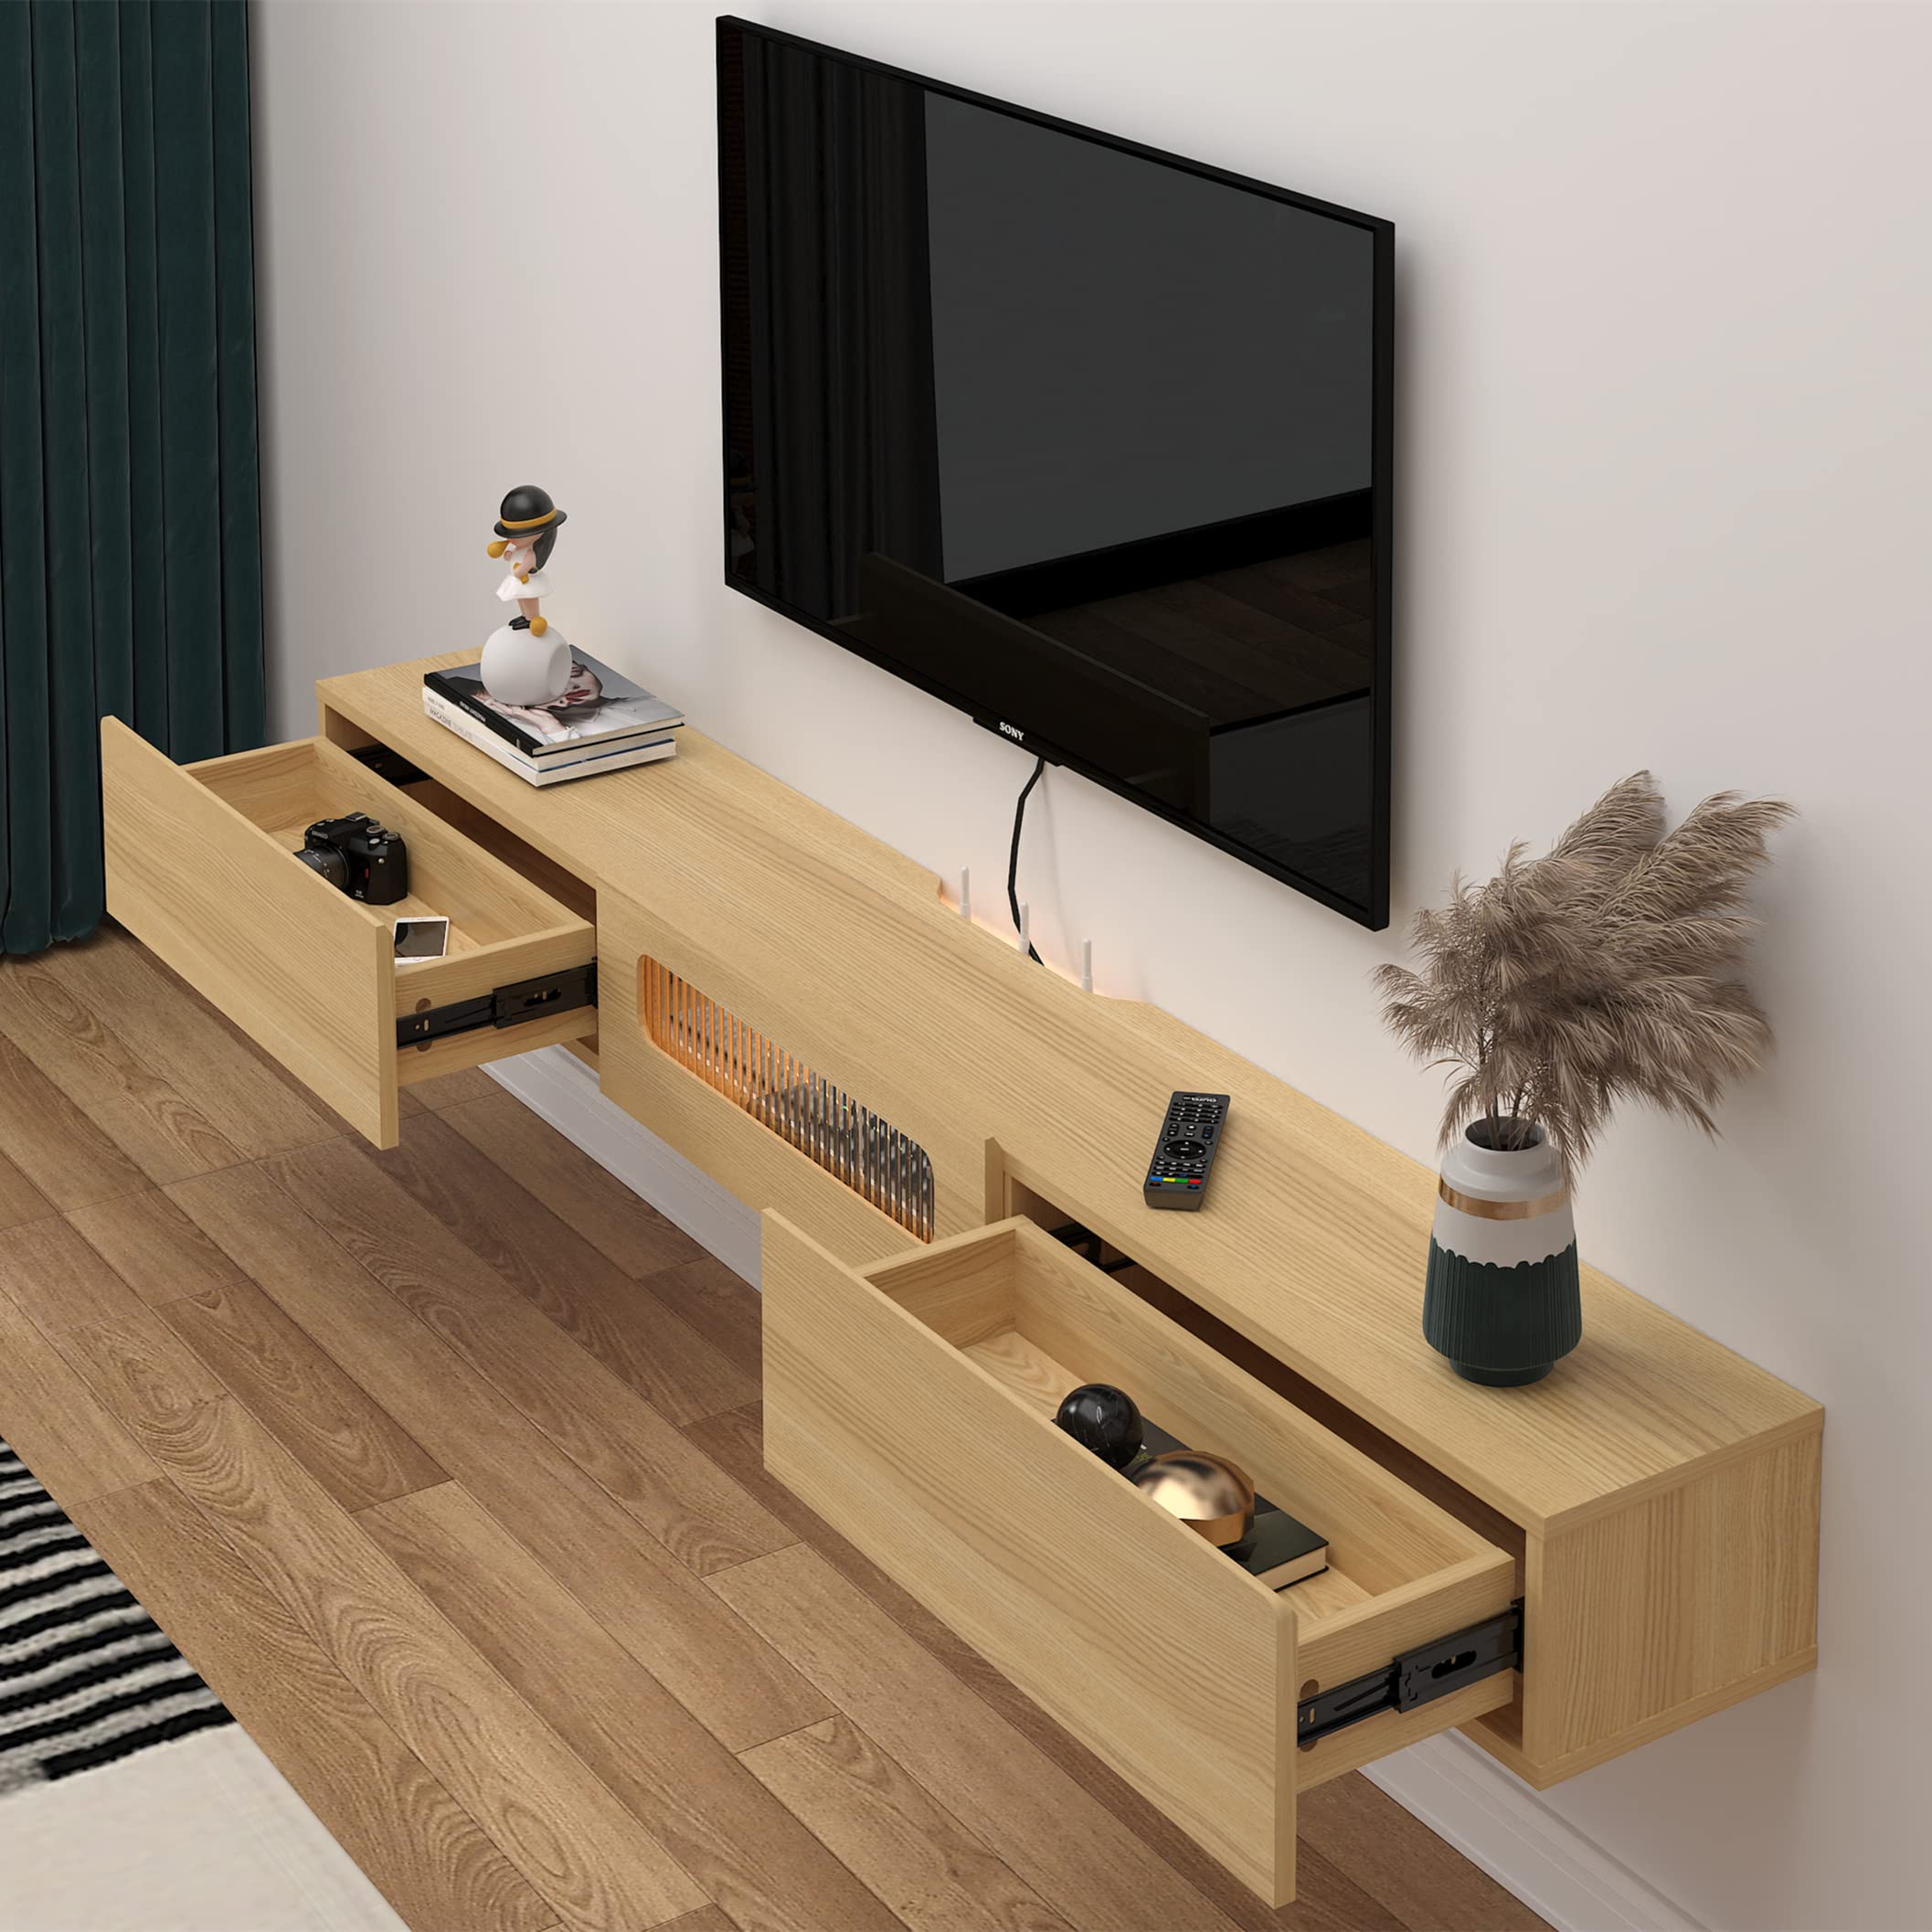 78.74" Plywood Floating TV Stand Wall Shelf with LED Lights and Storage Drawers